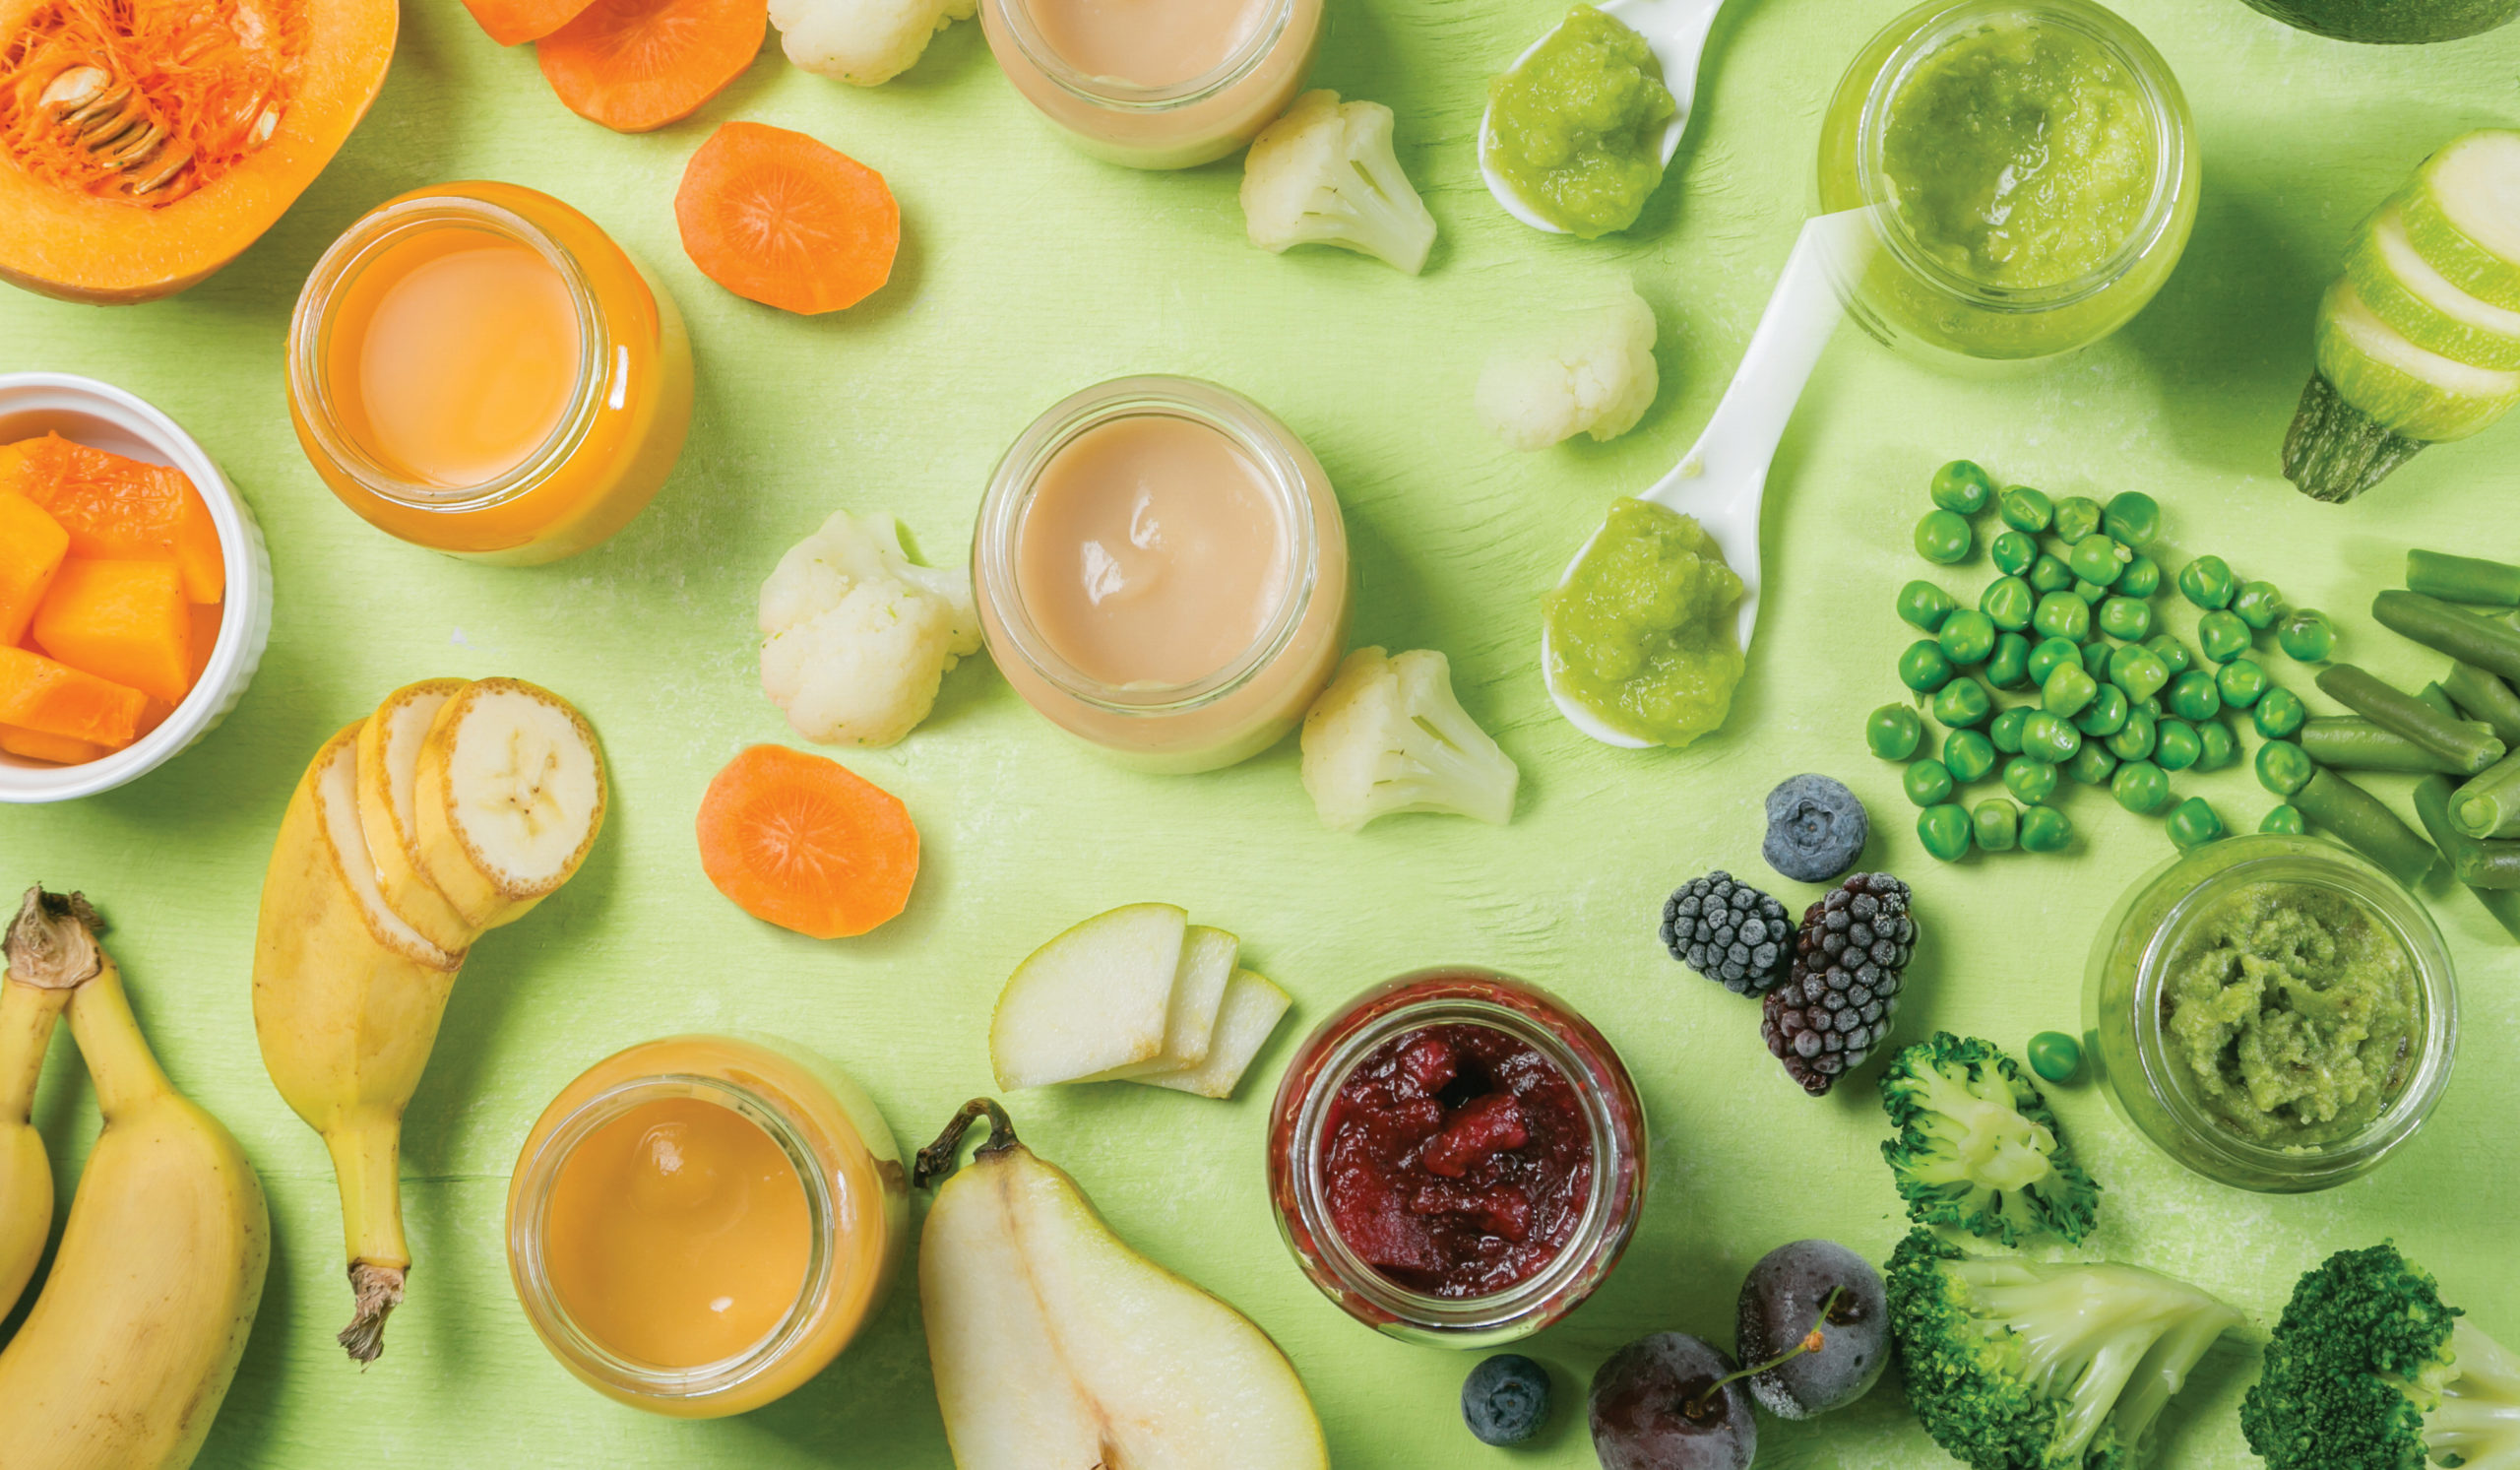 Jars of baby food and cut up bananas, carrots, peas, blueberries, and other colorful vegetables and fruits on a light green background.